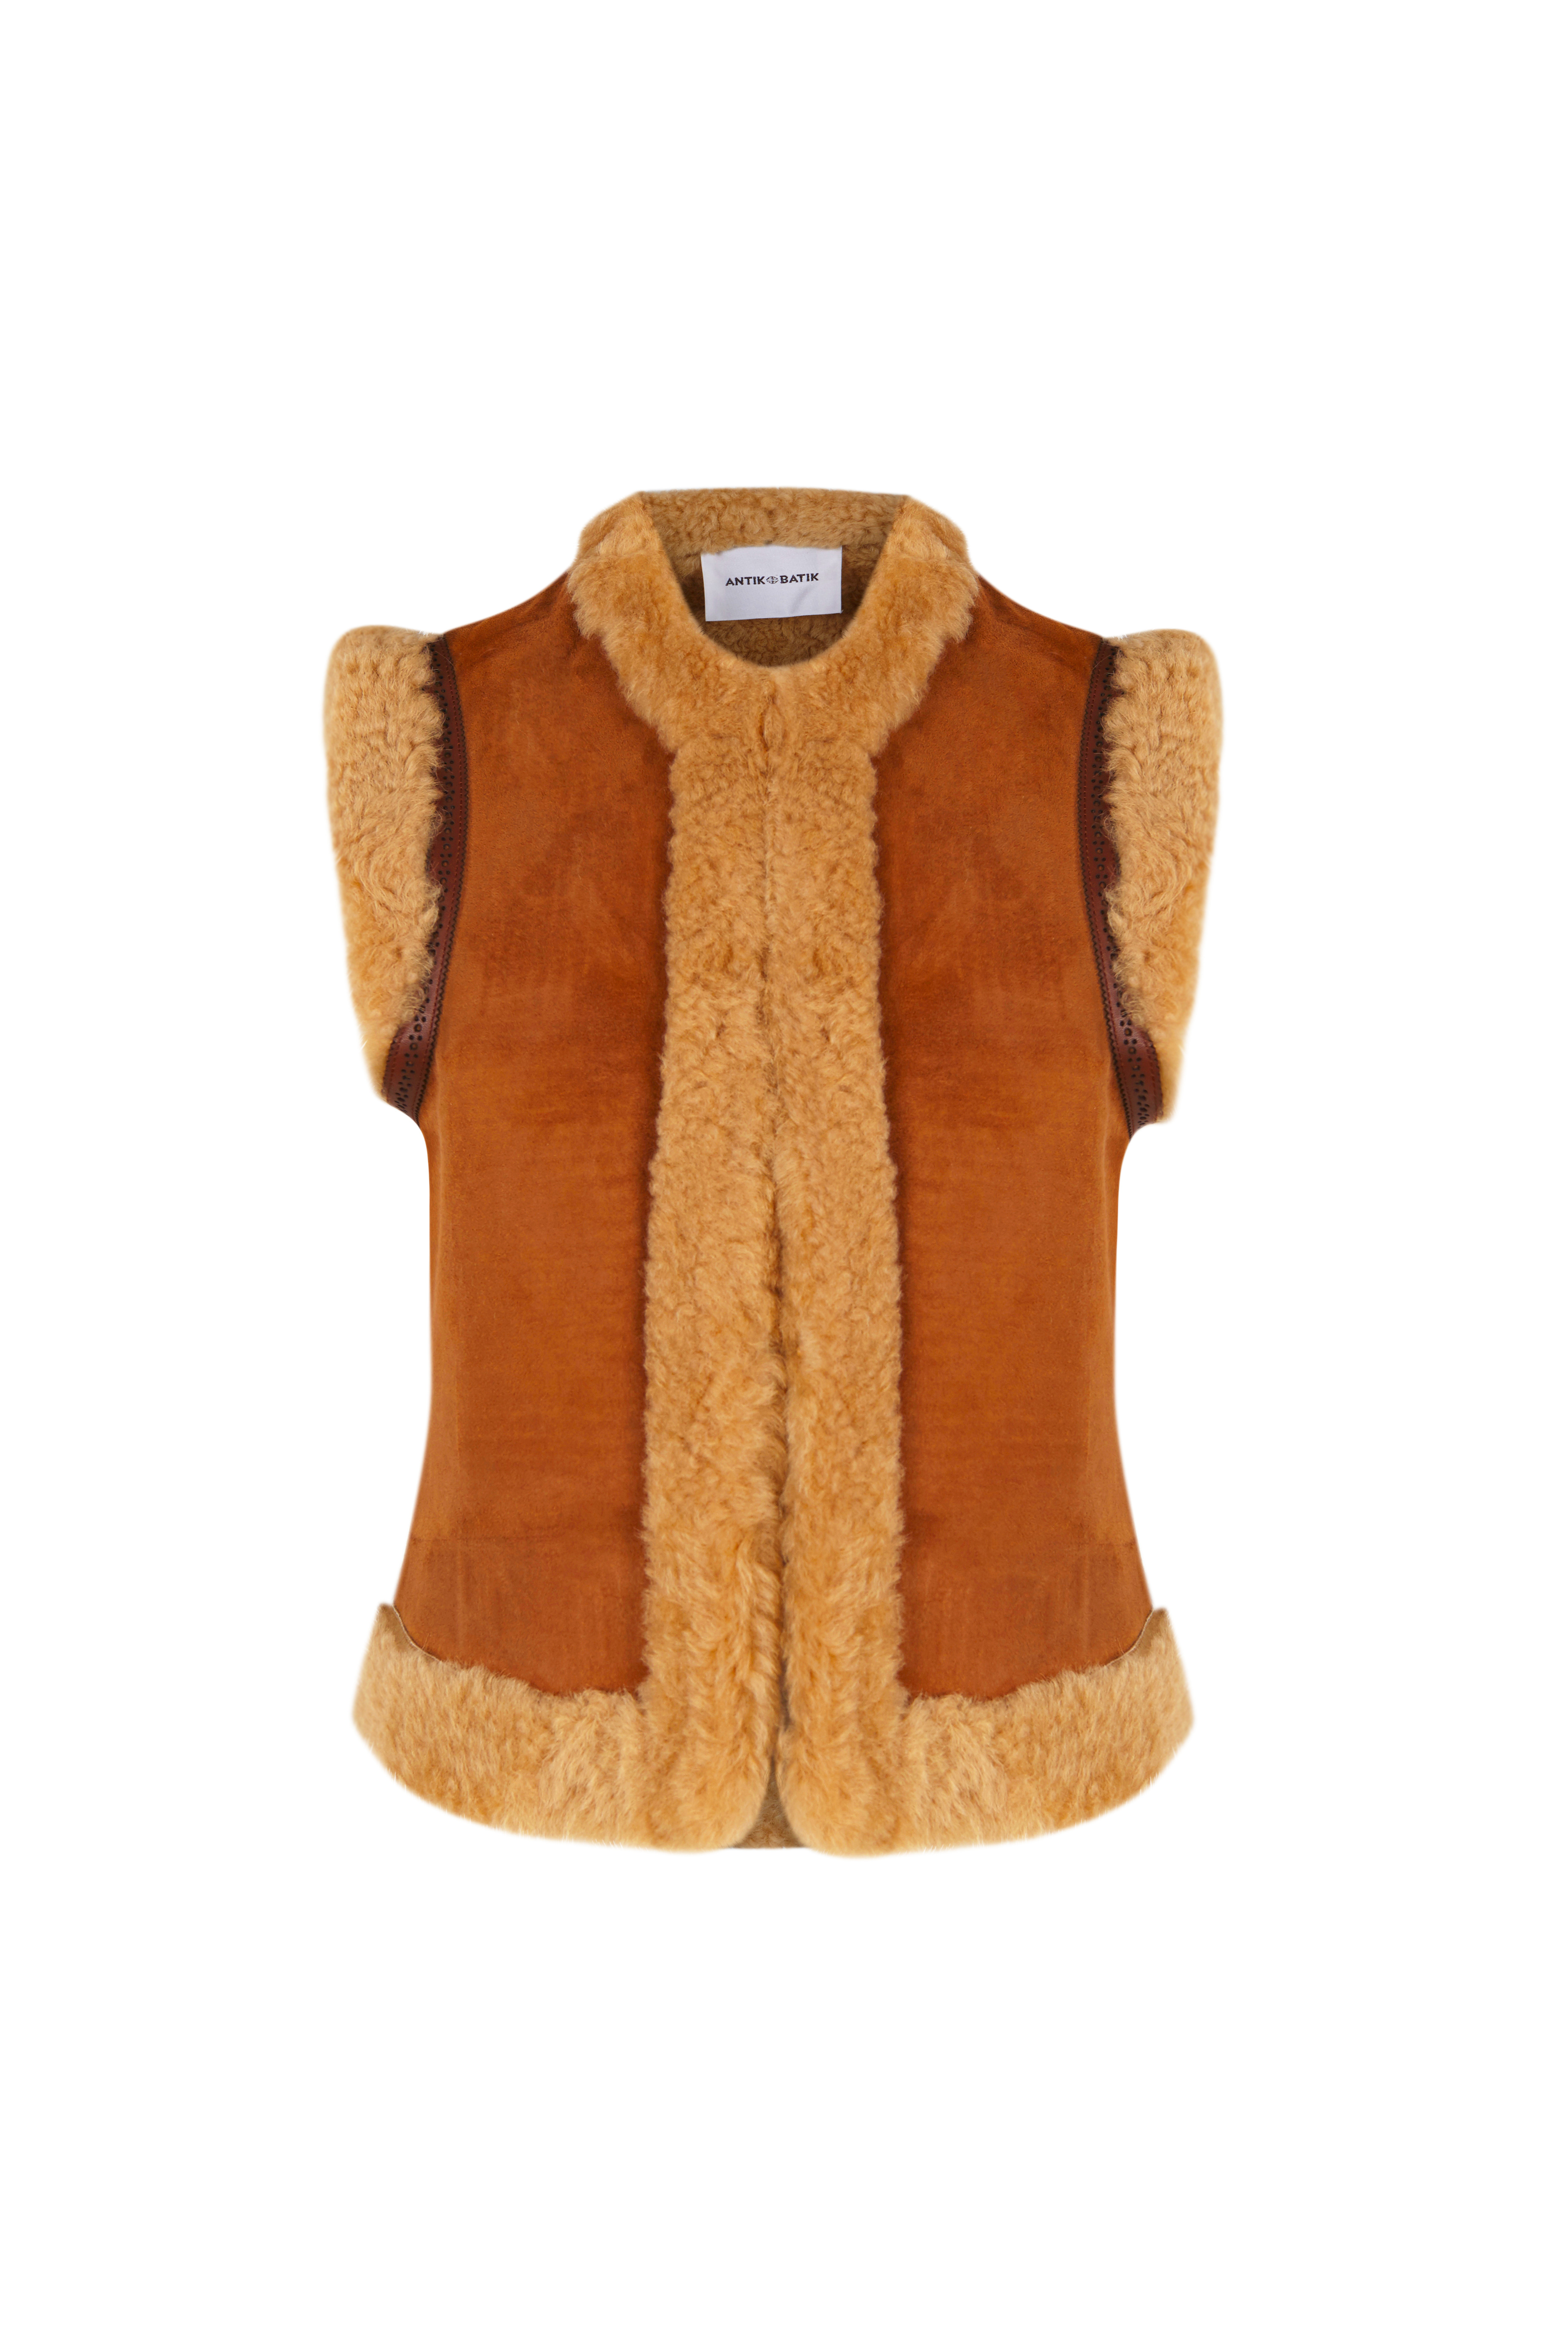 A packshot of the Dimera gilet, which is a fur gilet.